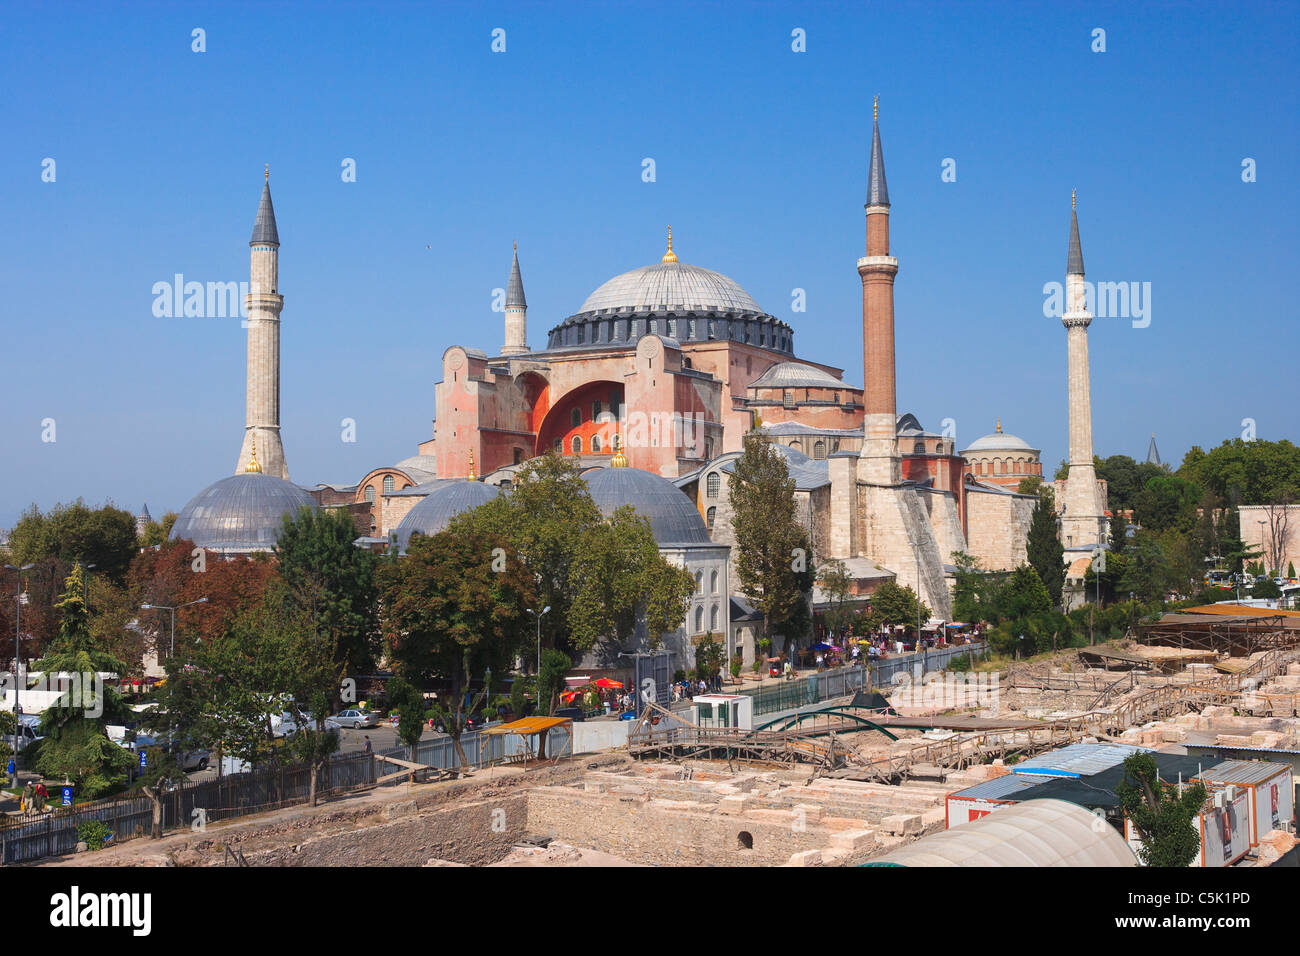 Hagia Sophia (inaugurated by the Byzantine Emperor Justinian in 537 AD), Istanbul, Turkey Stock Photo